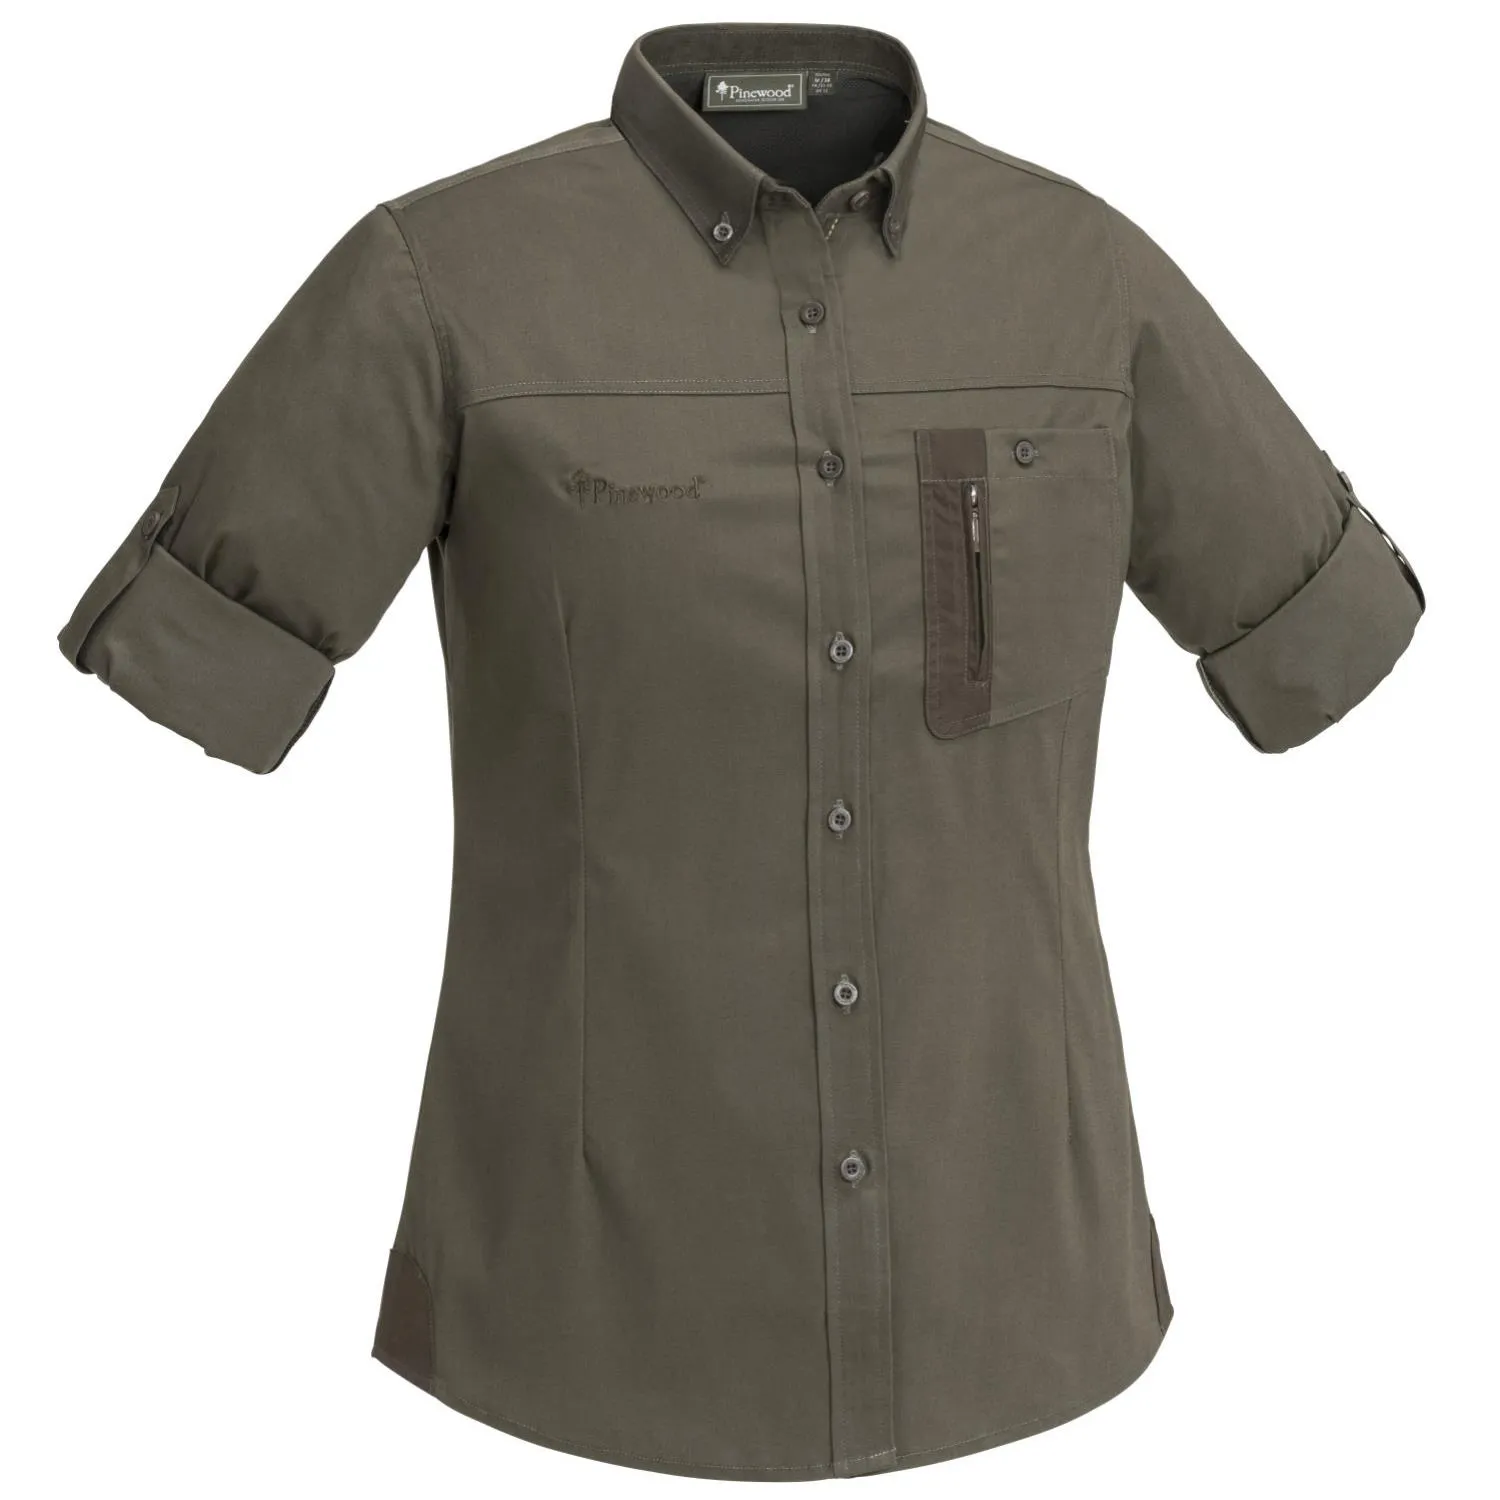 3016-241-2_Pinewood-Womens-Shirt-Tividen-TC-Stretch-Insect-Stop_Dark-Olive-Suede-Brown (1591).jpg